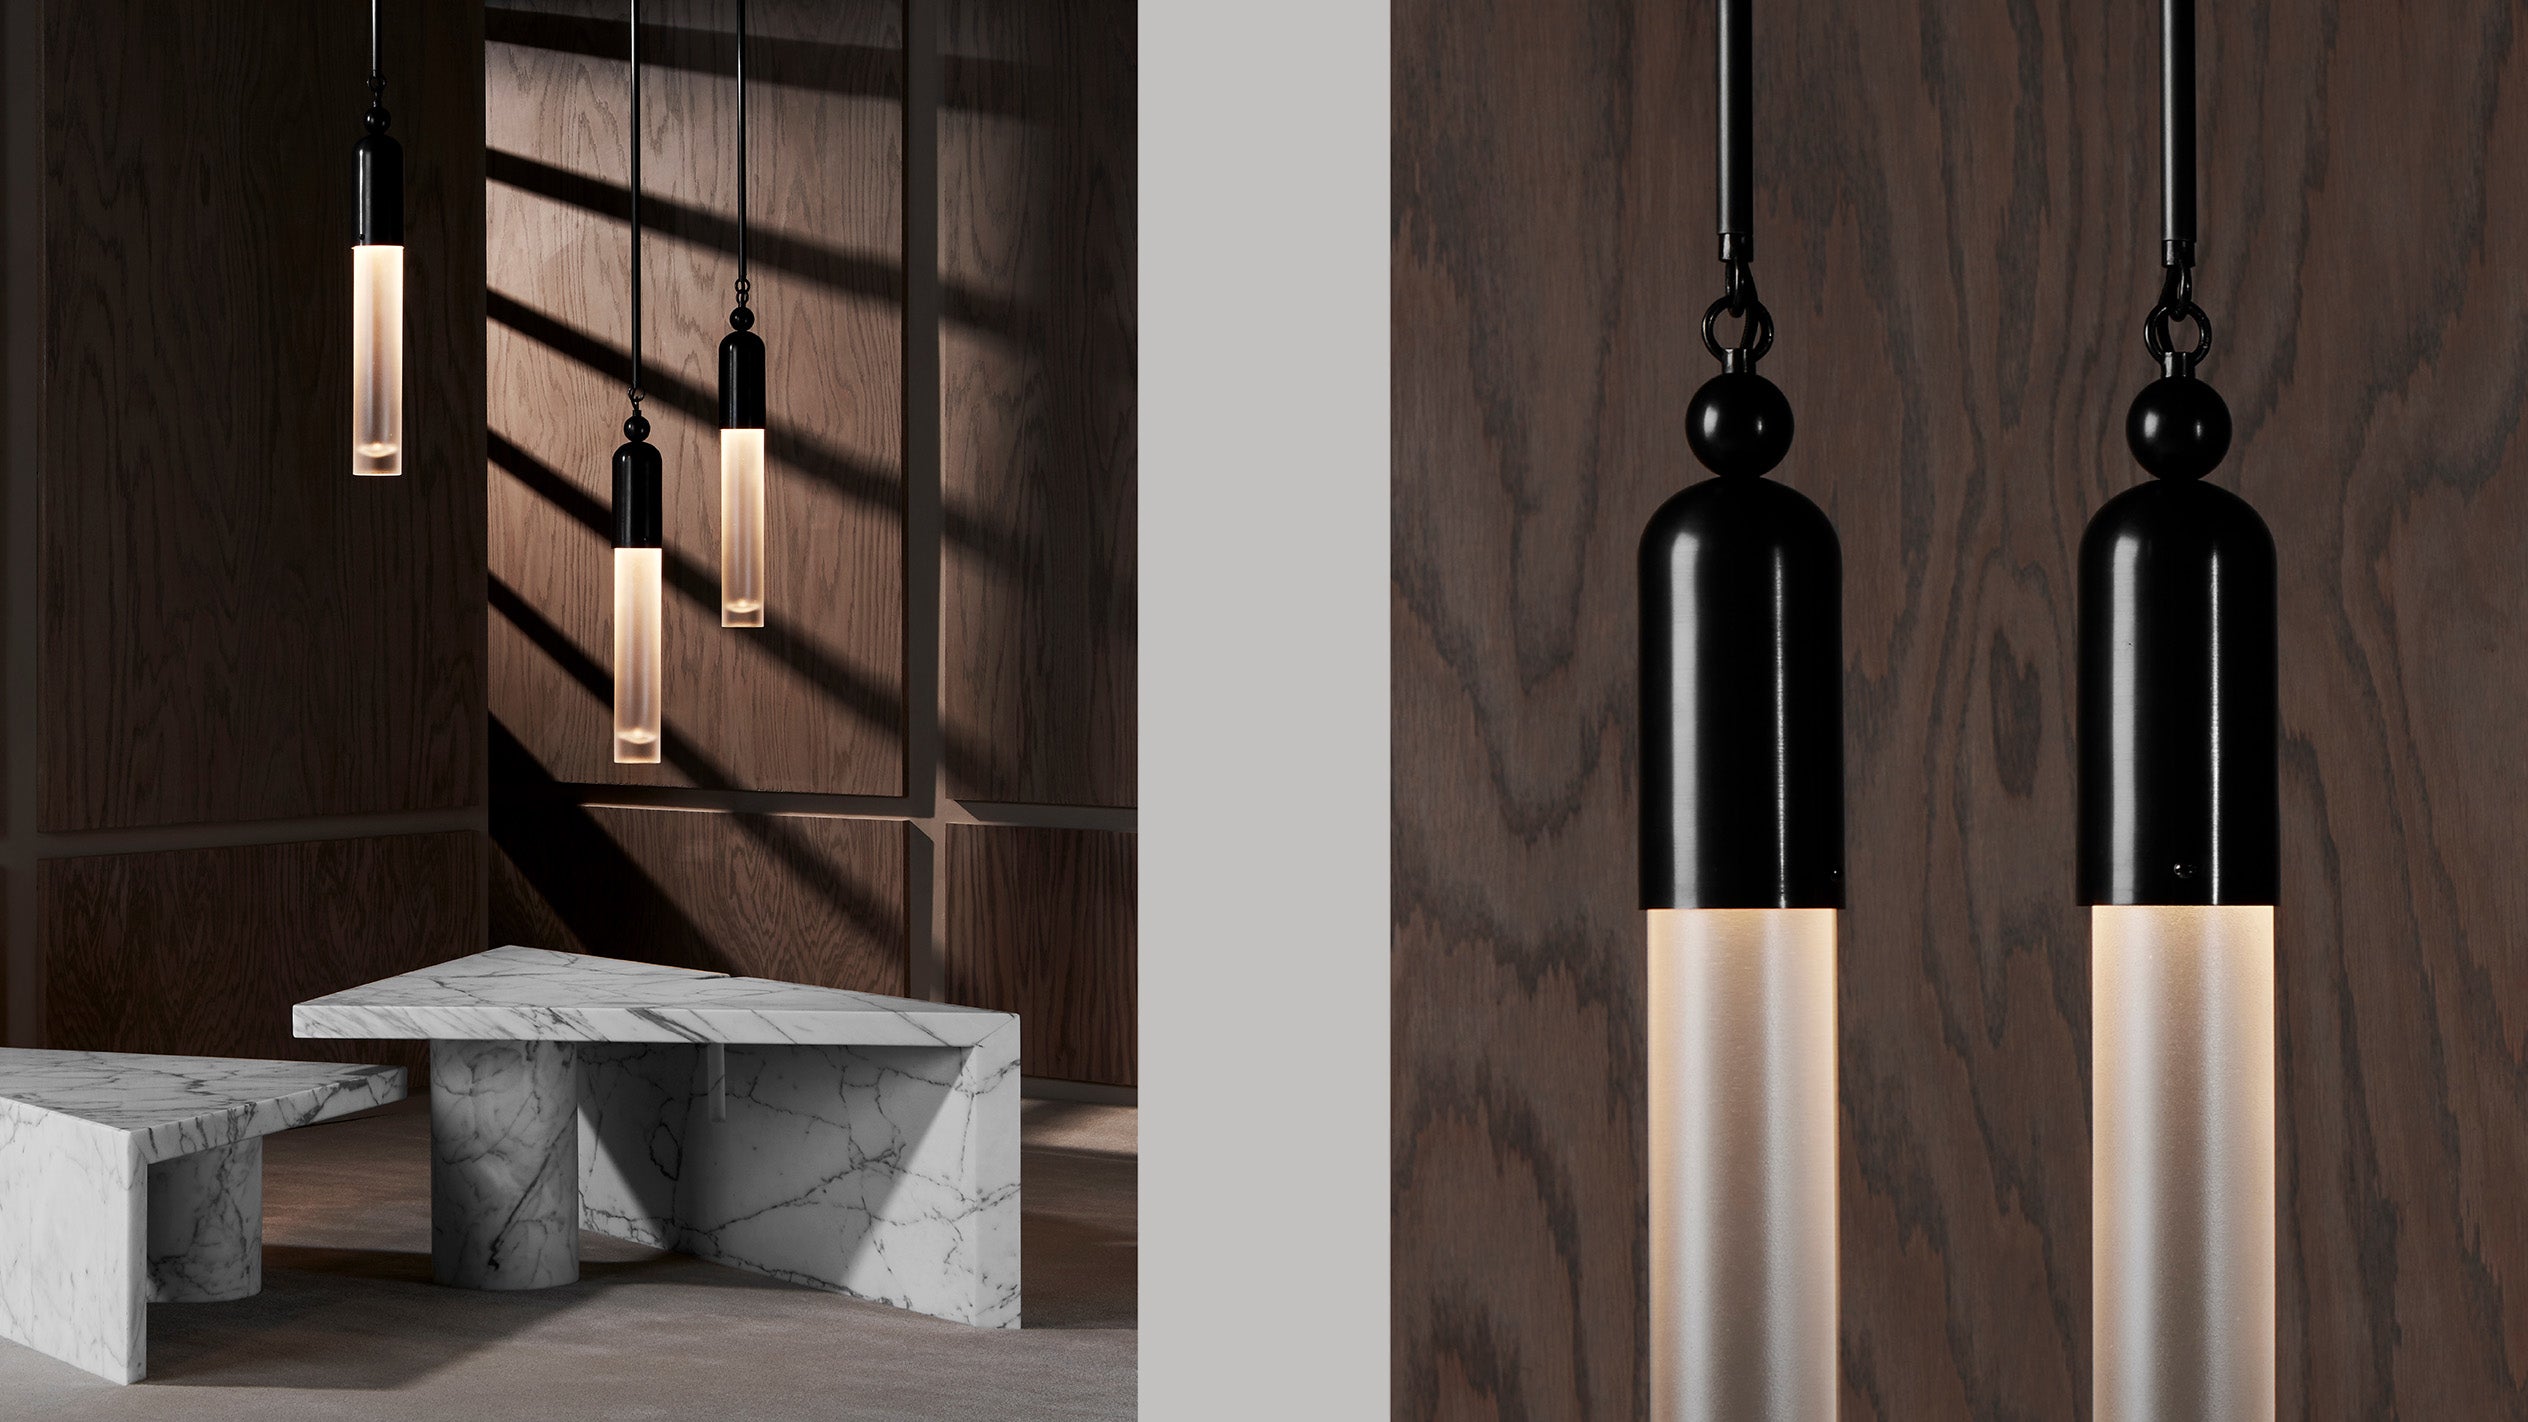 A trio of TASSEL : 1 ceiling pendants in Blackened Brass hanging at different heights over a marble table, alongside a close up image of a pair of illuminated TASSEL : 1 ceiling pendants showing details of the glass and of the Blackened Brass finish. 